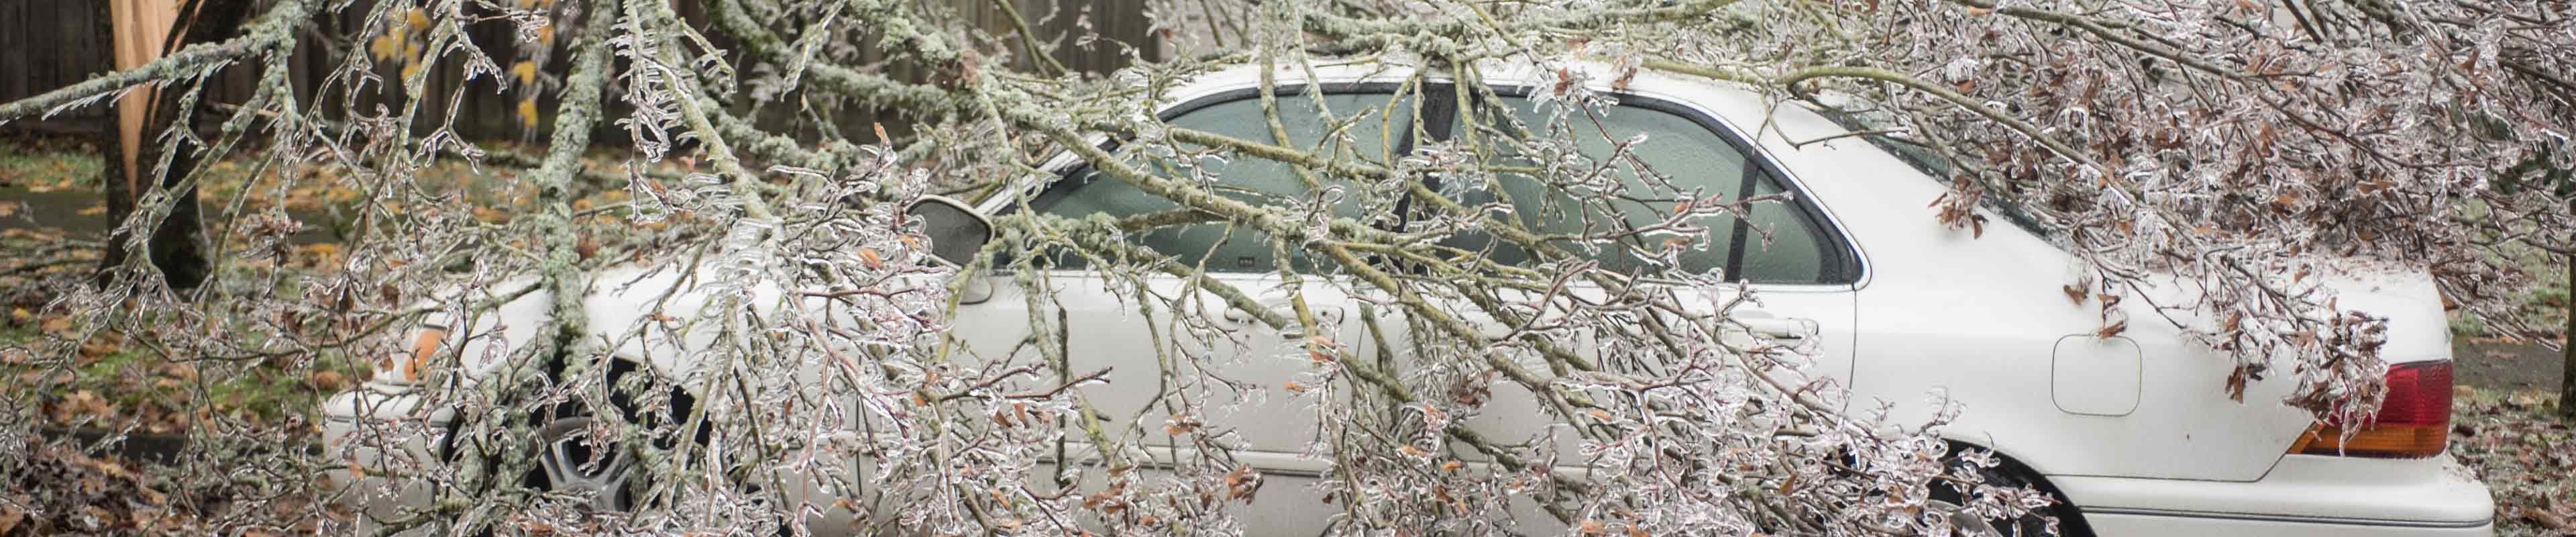 Tree covered with ice toppled onto a white car